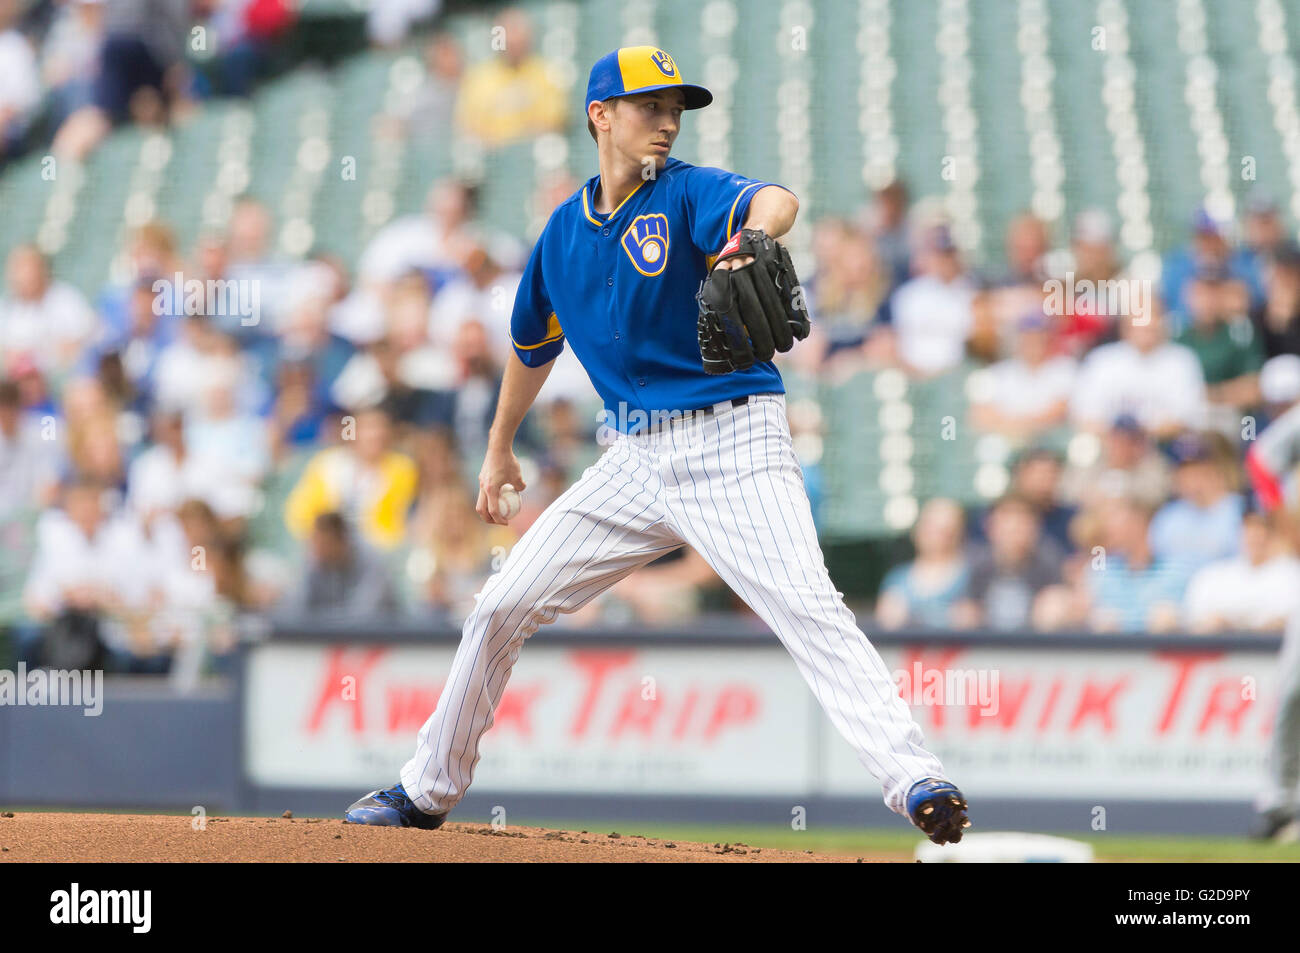 Milwaukee, WI, USA. 27th May, 2016. Milwaukee Brewers starting pitcher Zach Davies #27 delivers a pitch in the Major League Baseball game between the Milwaukee Brewers and the Cincinnati Reds at Miller Park in Milwaukee, WI. Brewers defeated the Reds 9-5. John Fisher/CSM/Alamy Live News Stock Photo